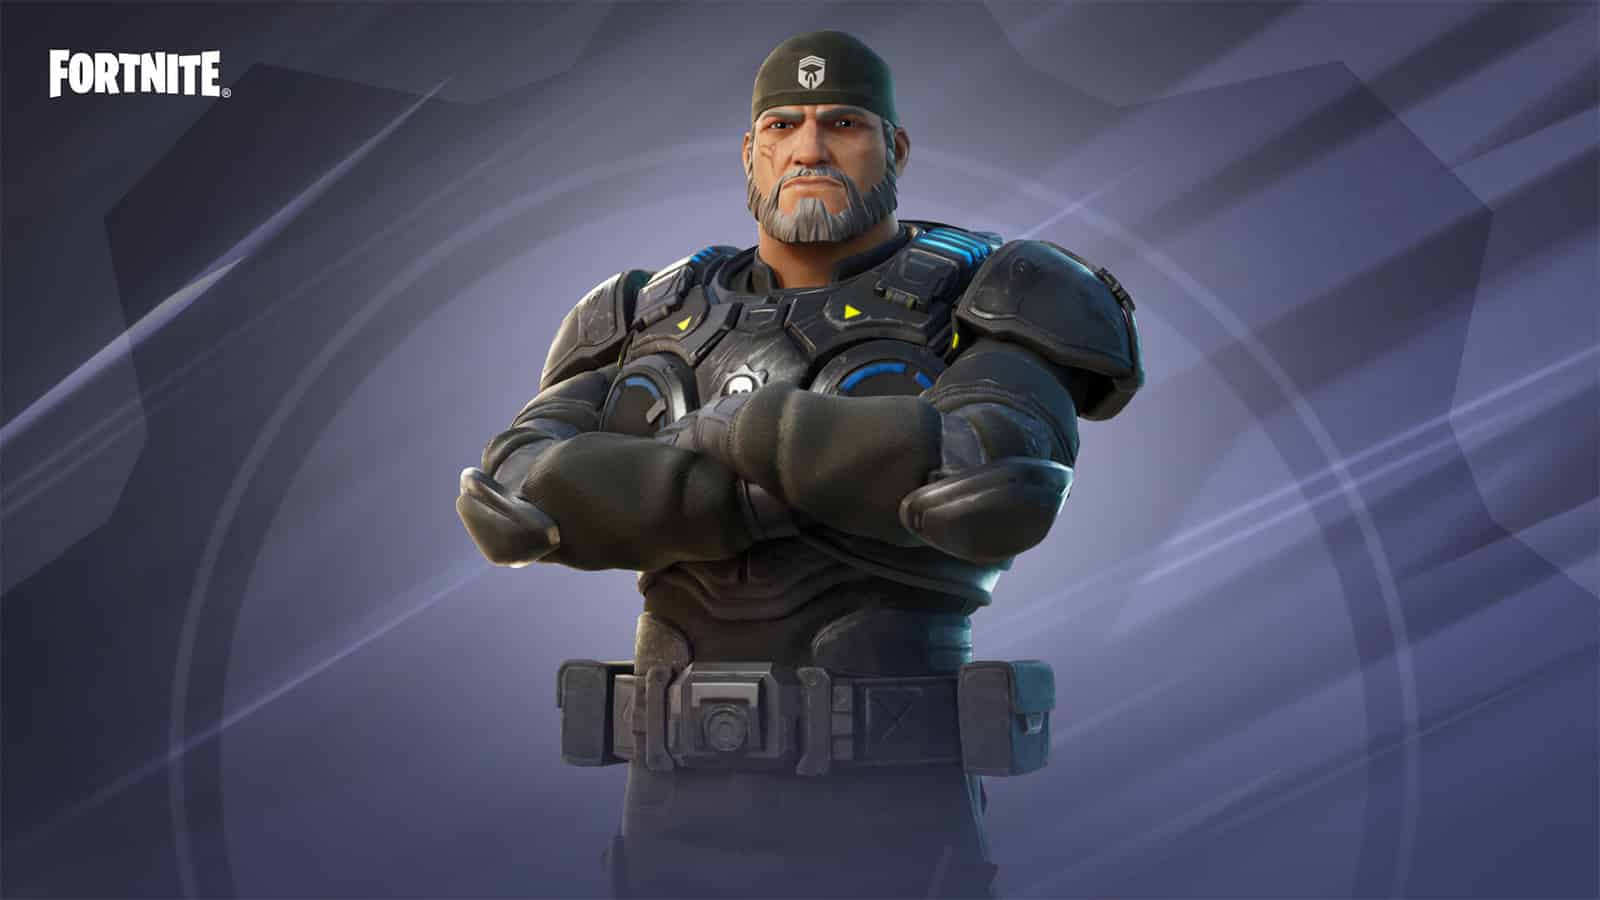 Gears of War star Marcus Fenix with a matte black style outfit in Fortnite